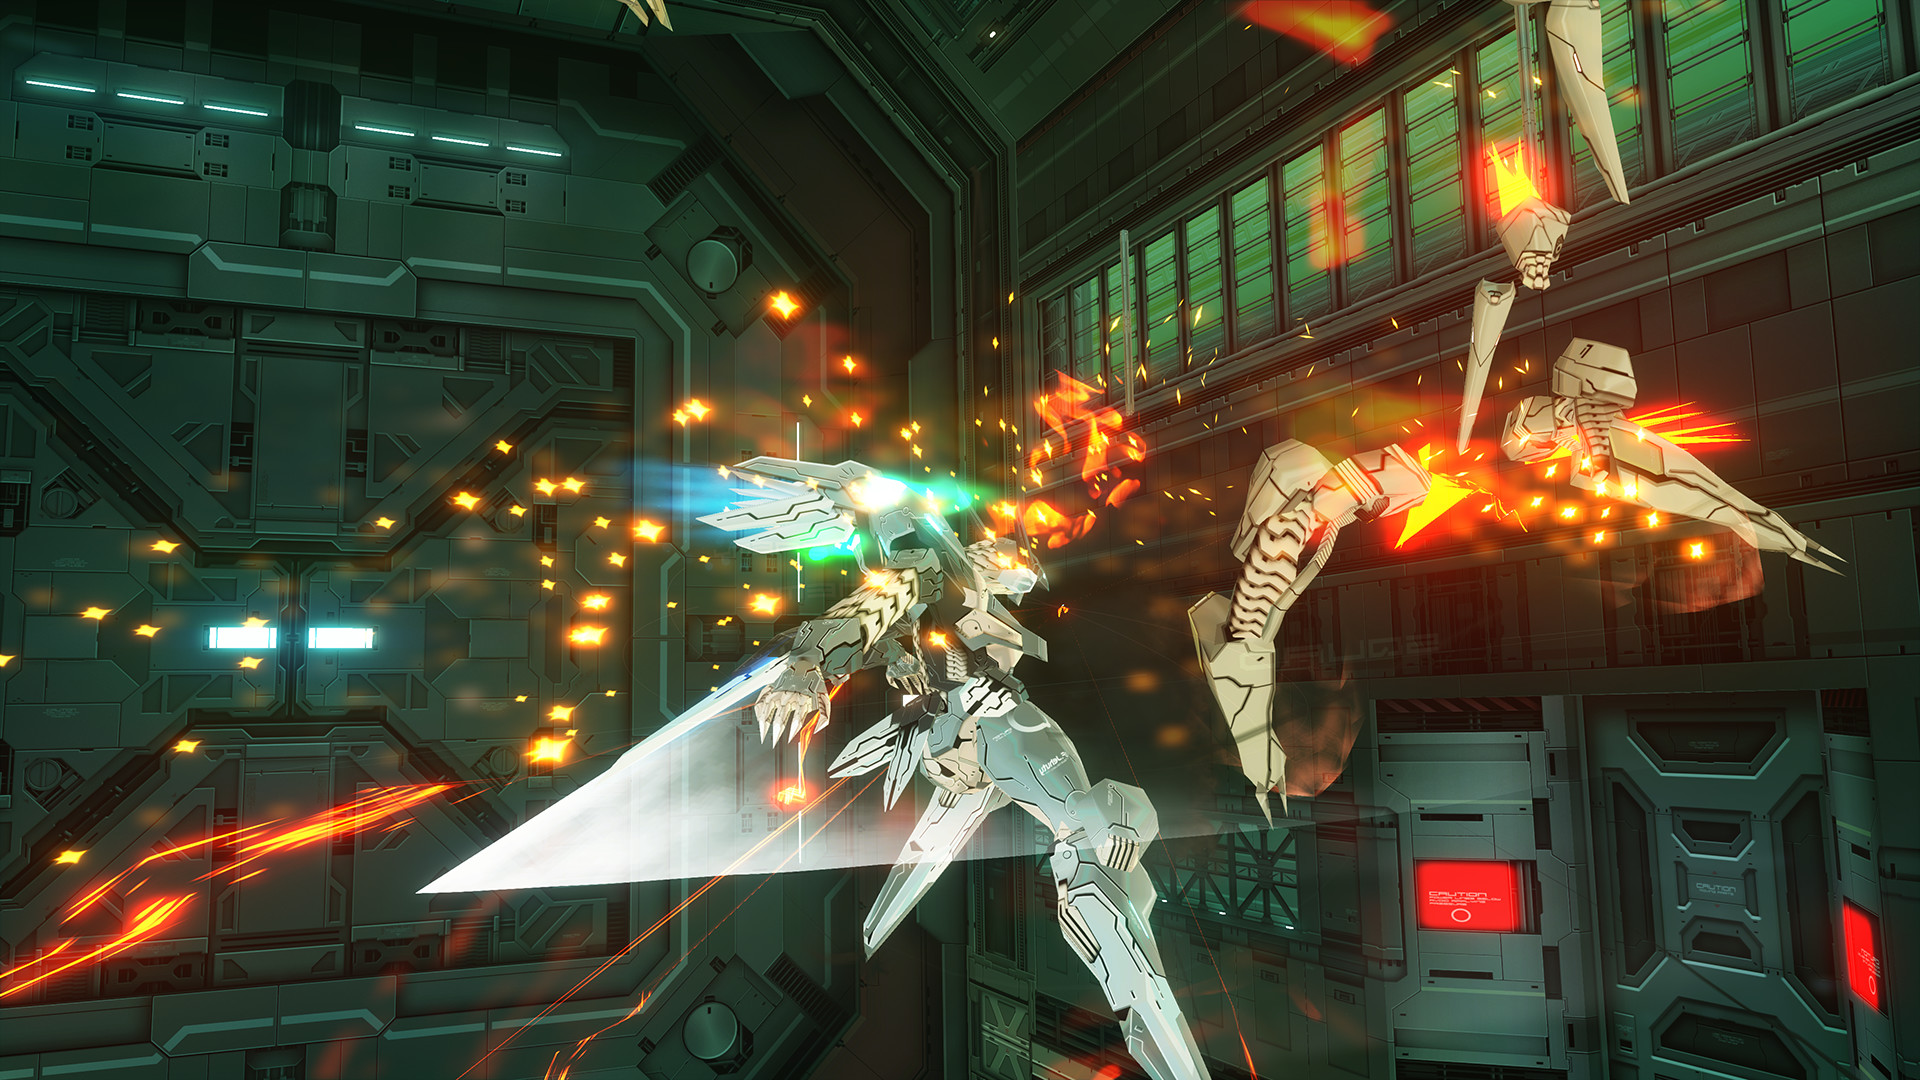 Zone of the Enders: The 2nd Runner: Special Edition